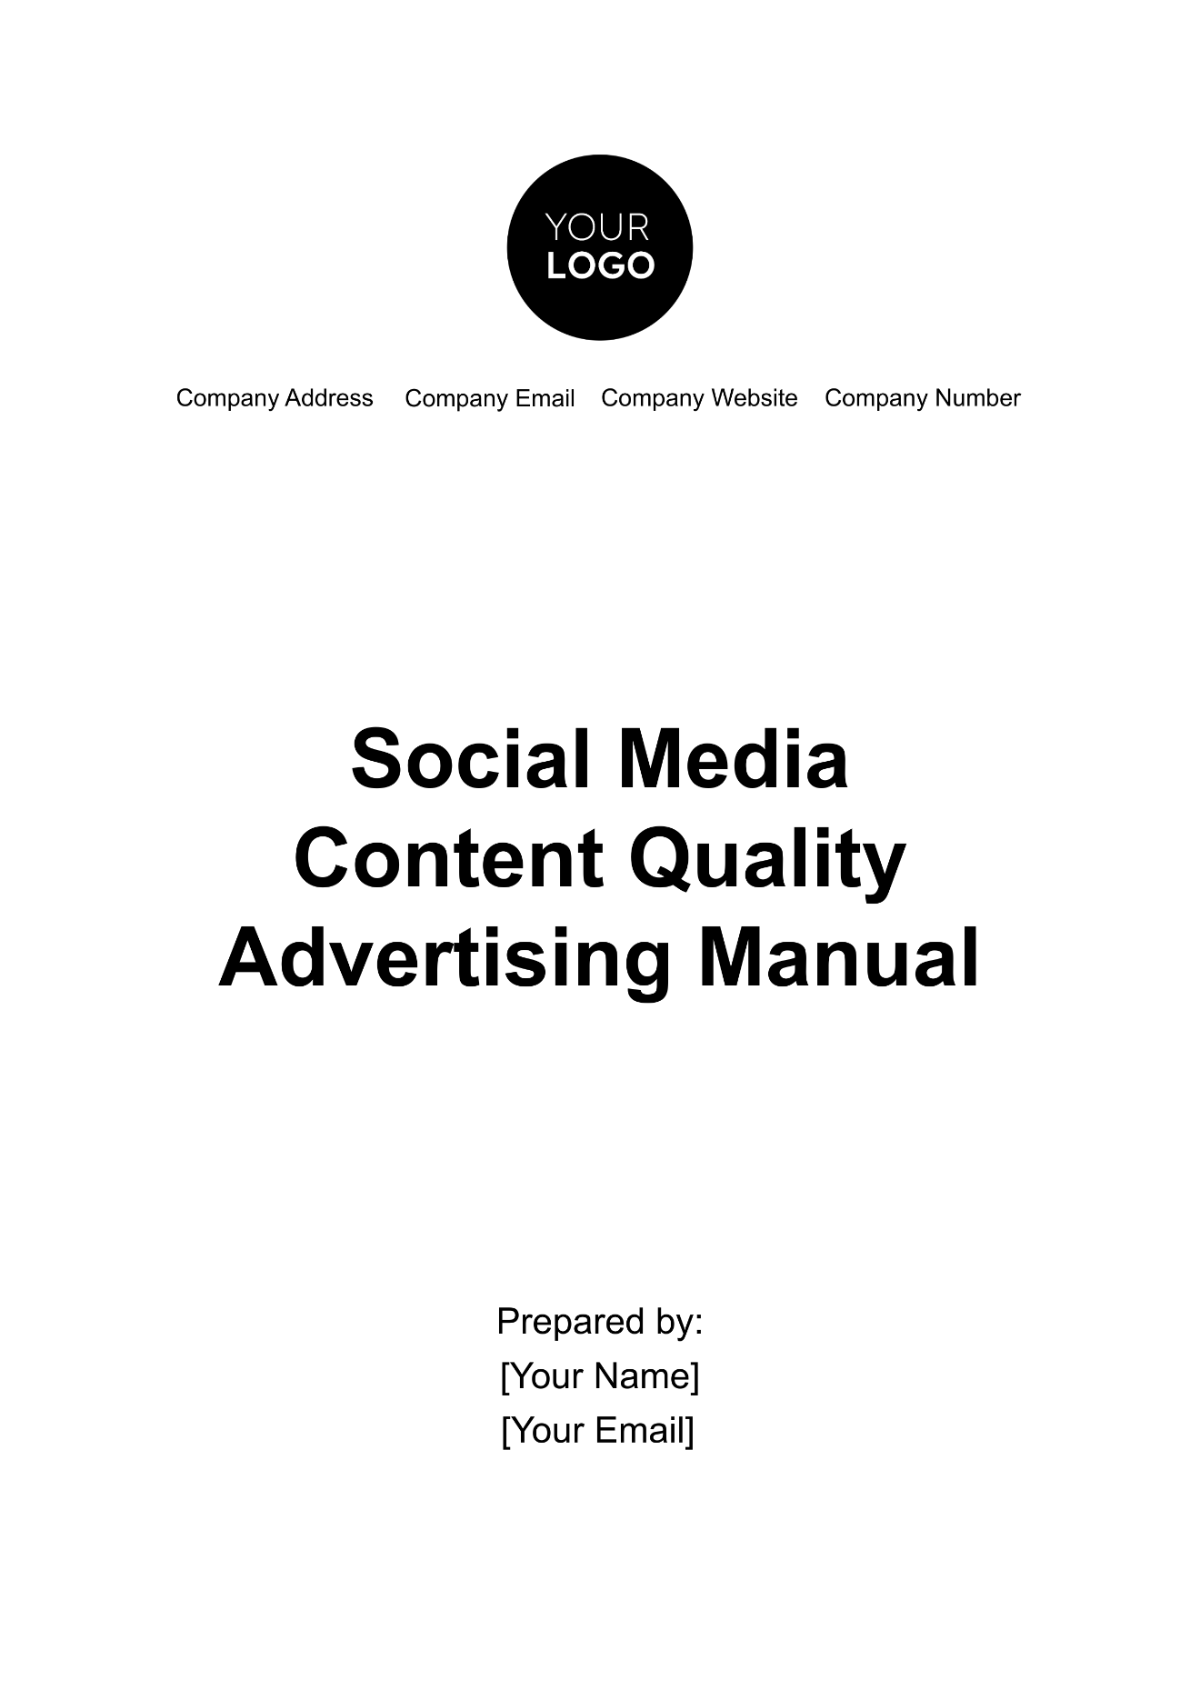 Social Media Content Quality Advertising Manual Template